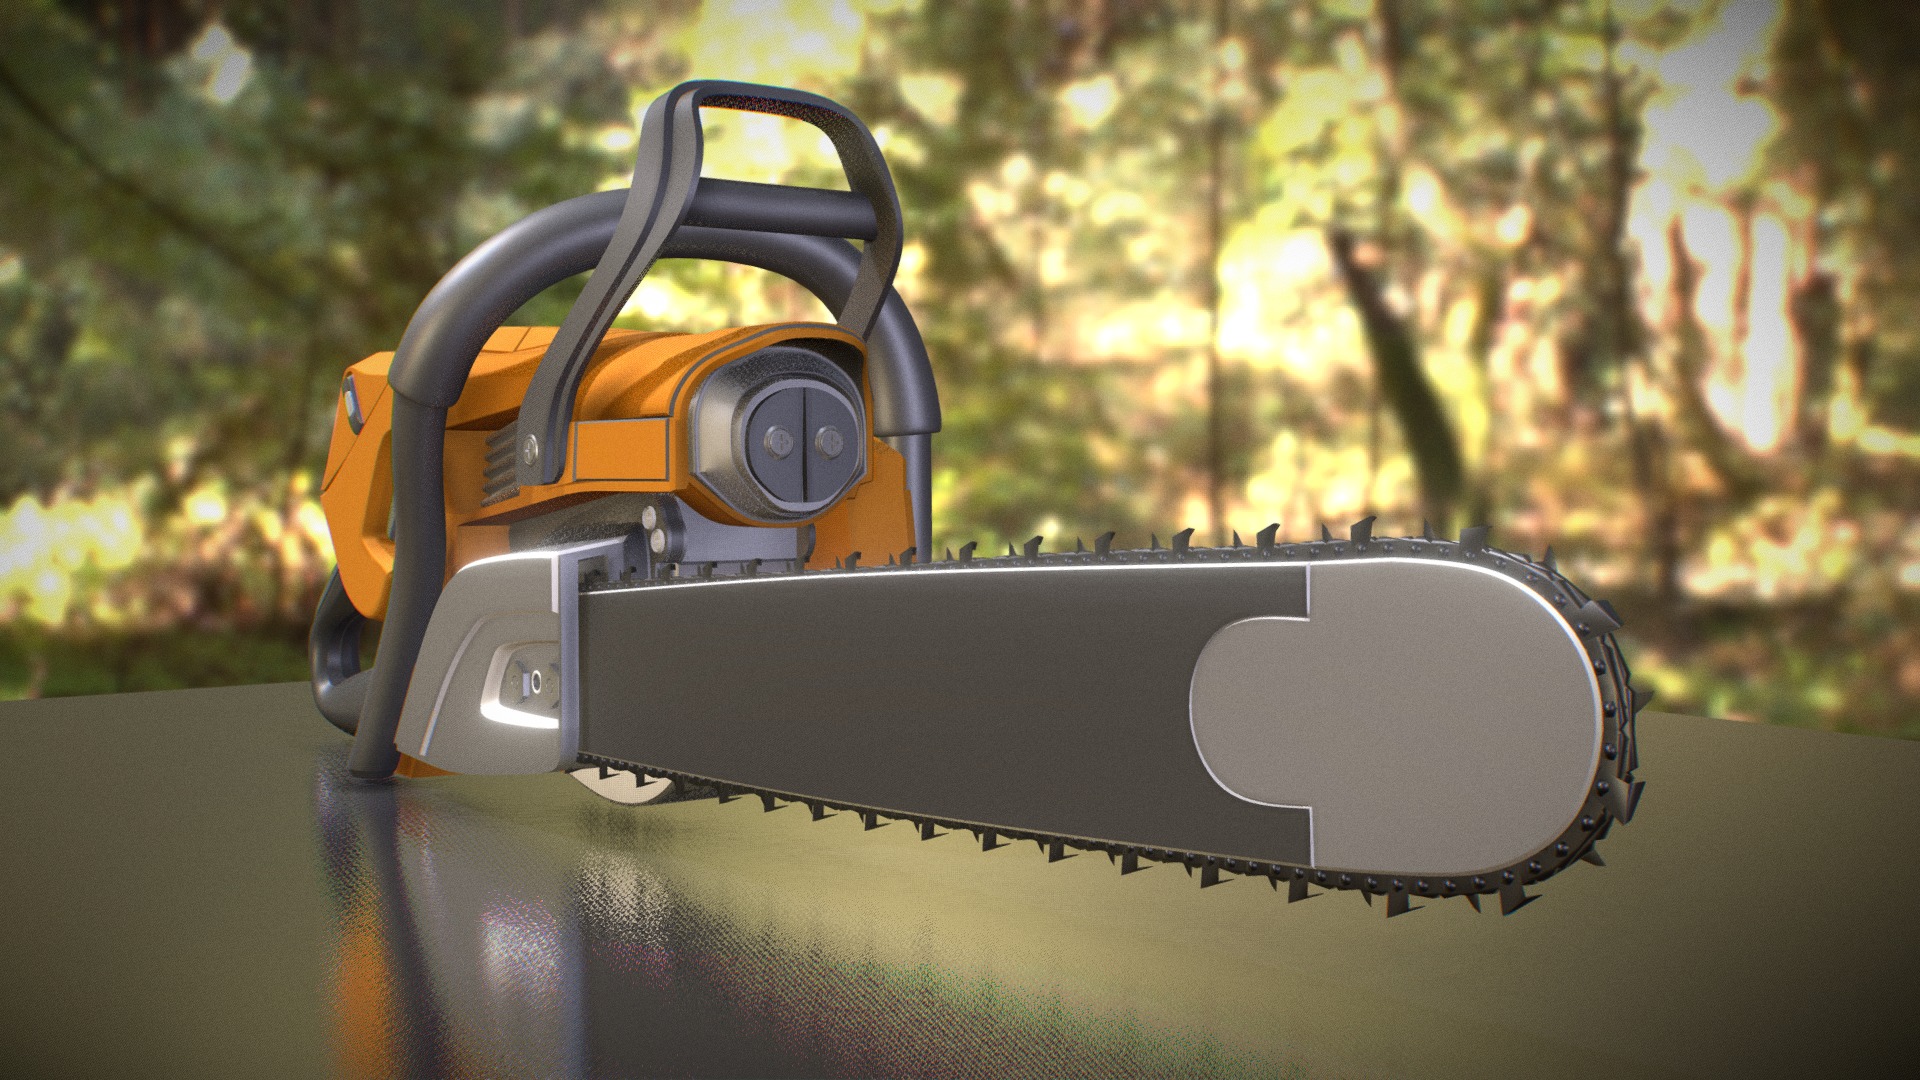 3D model Chainsaw High-Poly with Animation - This is a 3D model of the Chainsaw High-Poly with Animation. The 3D model is about a pair of sunglasses on a car.